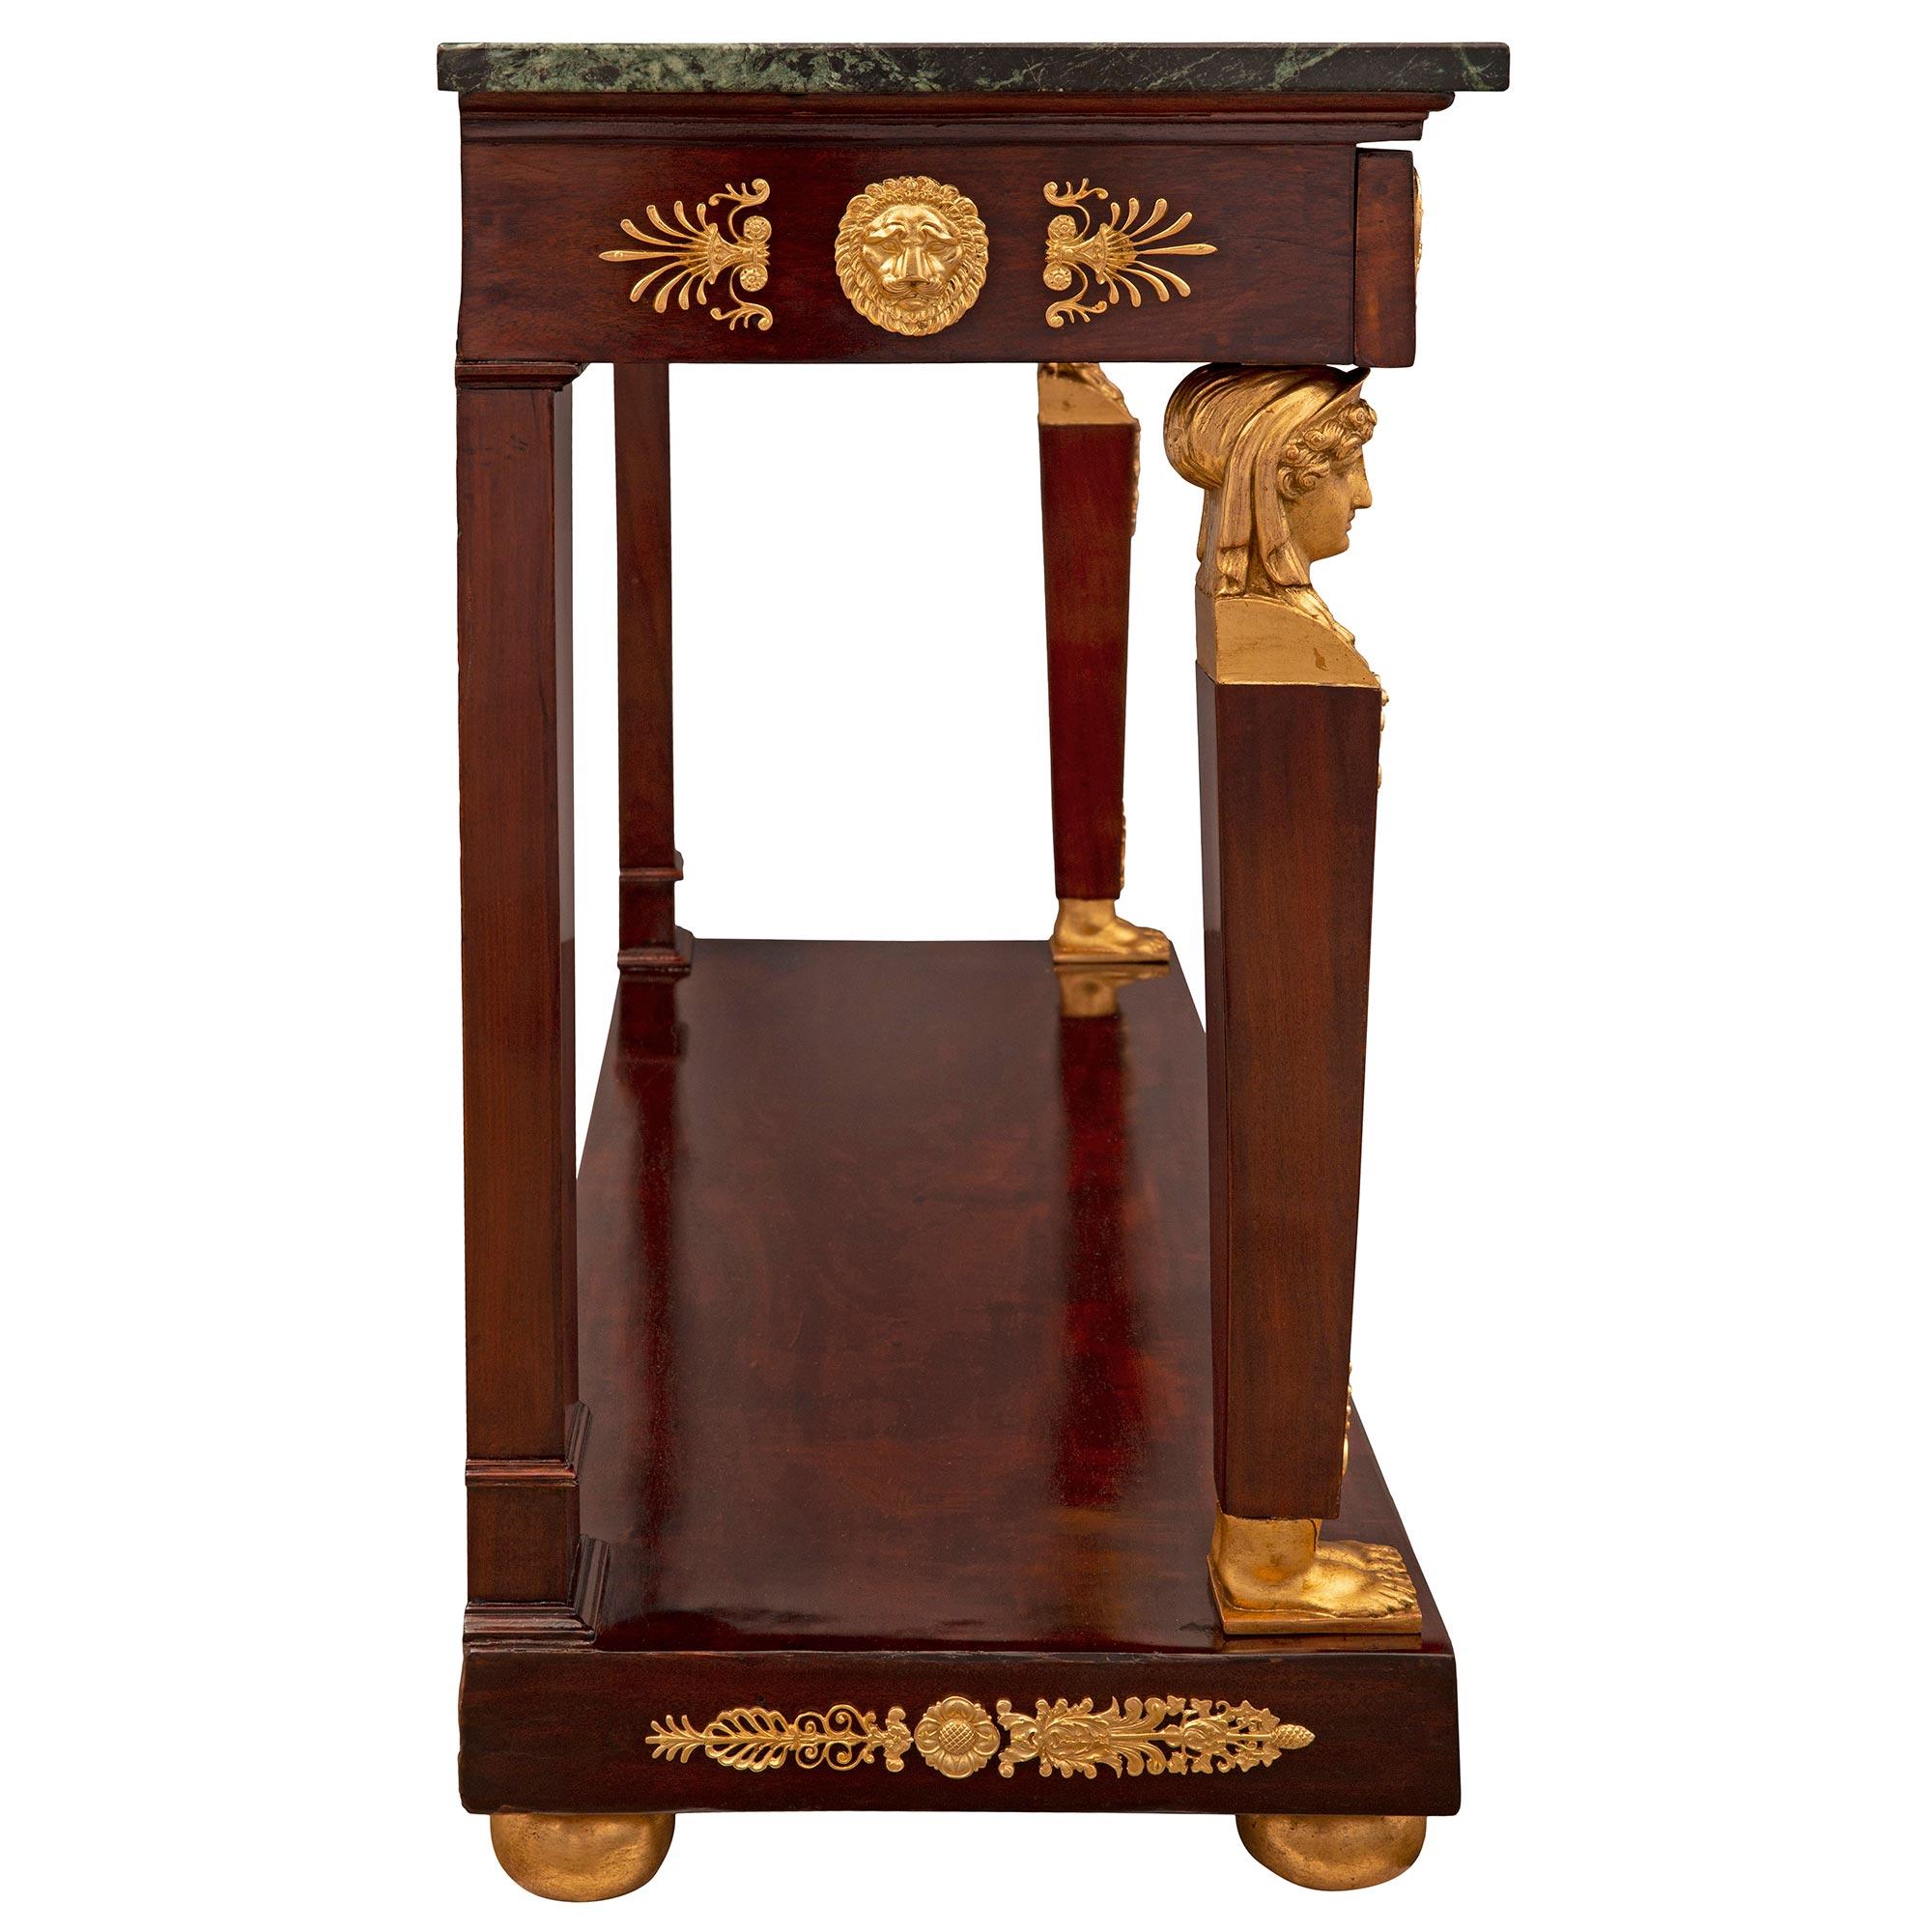 French 19th Century 1st Empire Period Mahogany, Ormolu, and Marble Console For Sale 2